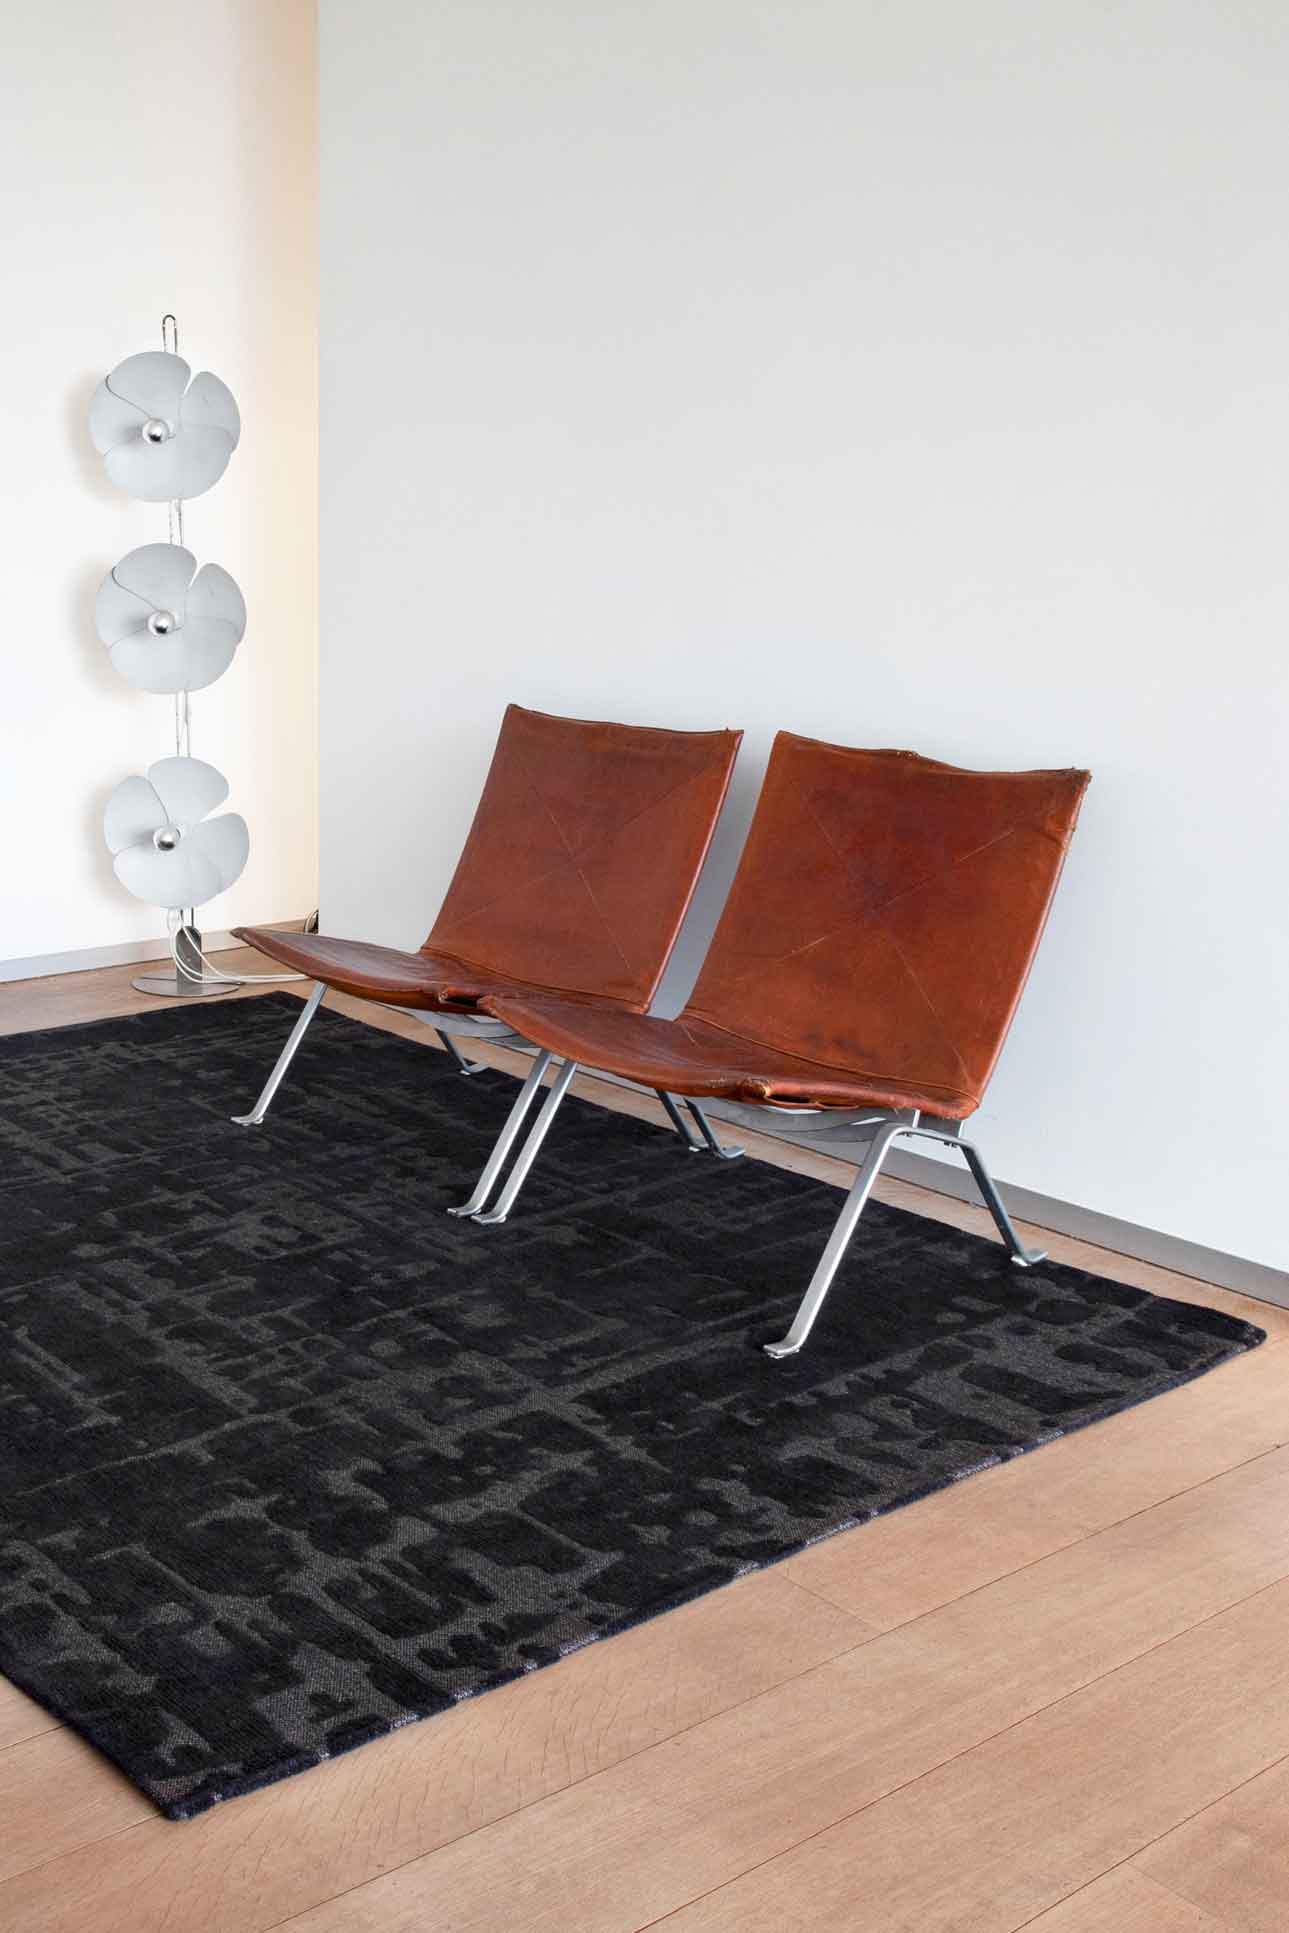 Abstract Black Belgian Rug ☞ Size: 2' 7" x 8' 2" (80 x 250 cm)